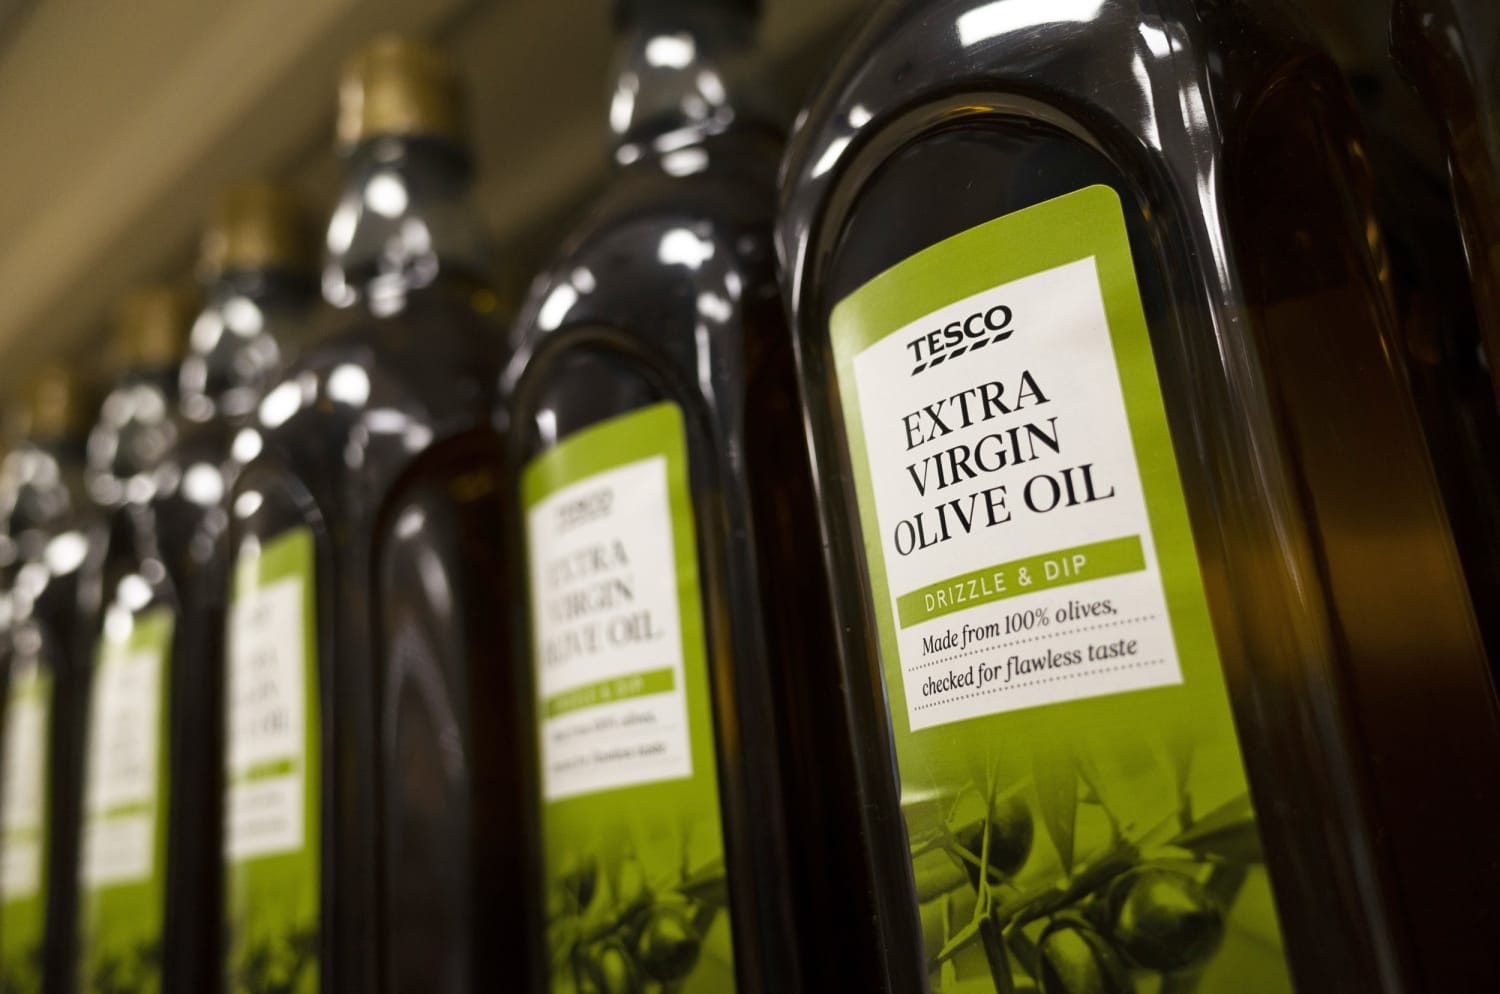 Olive oil prices surge over 100% to record highs and spark cooking oil thefts